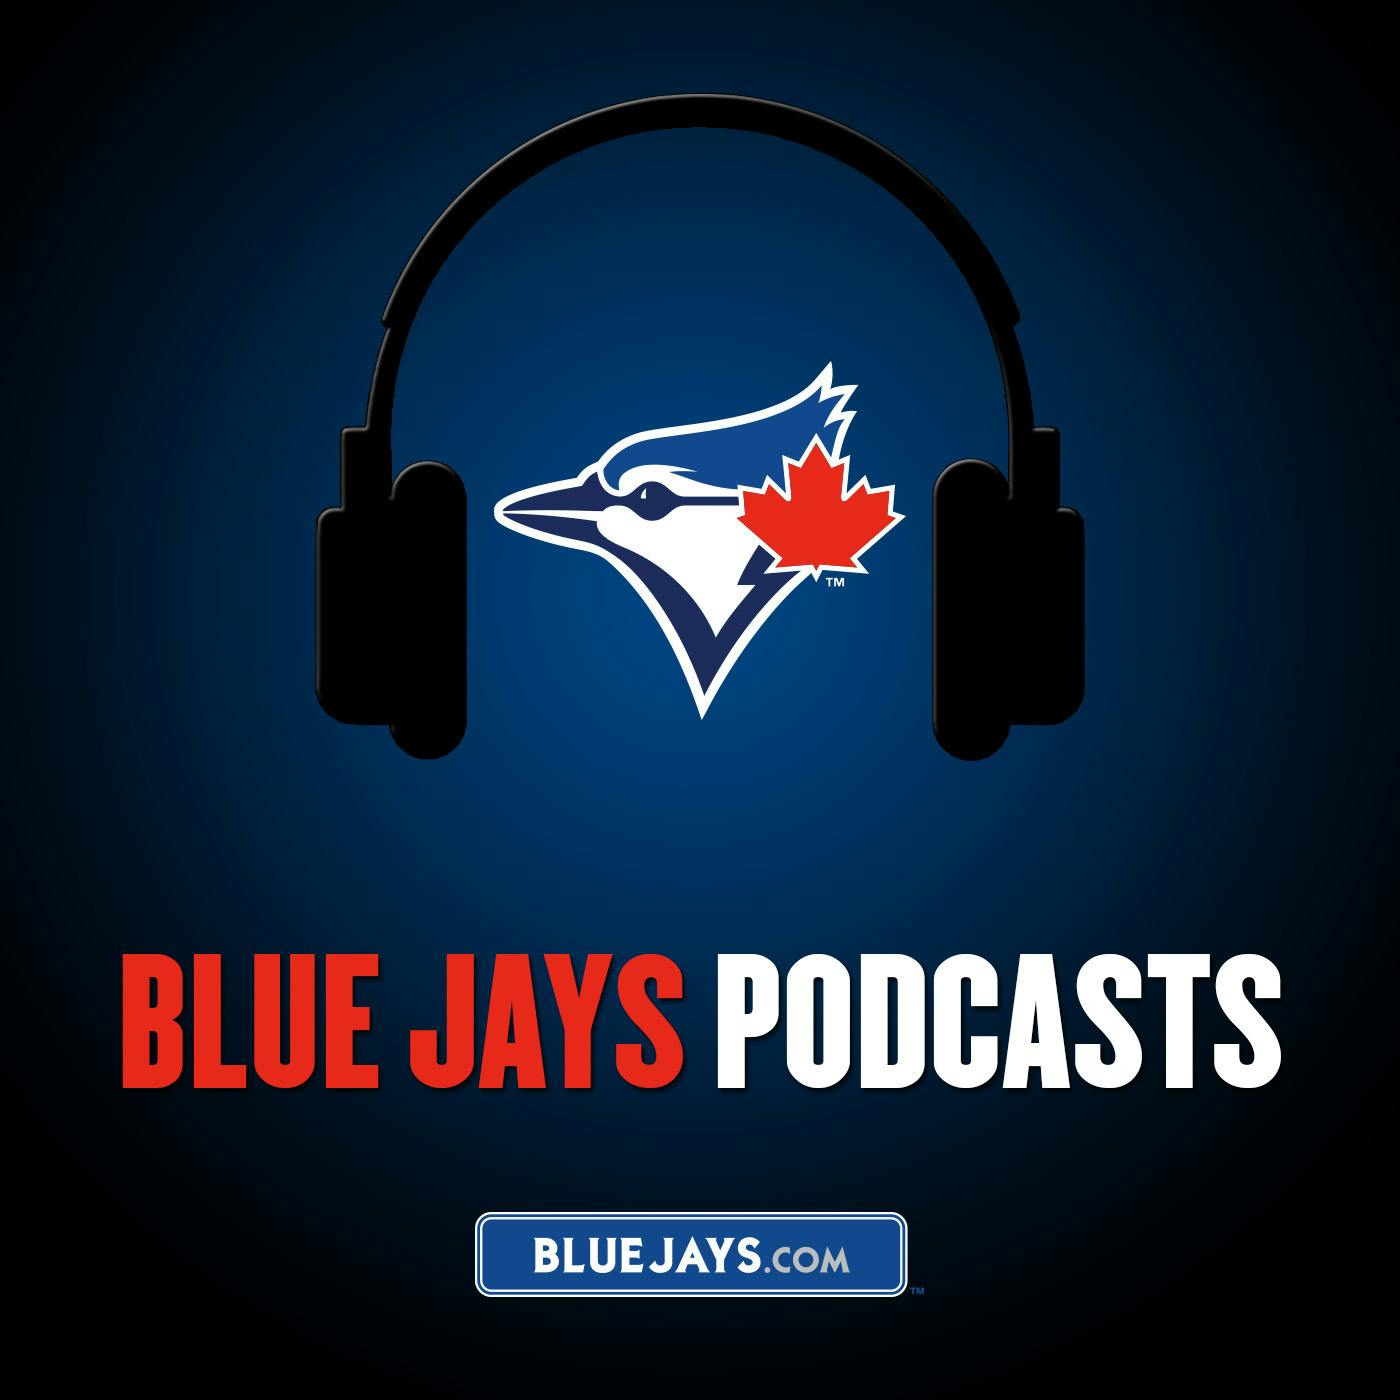 1/9/19: Blue Jays Extras | Toronto's outfield in 2019